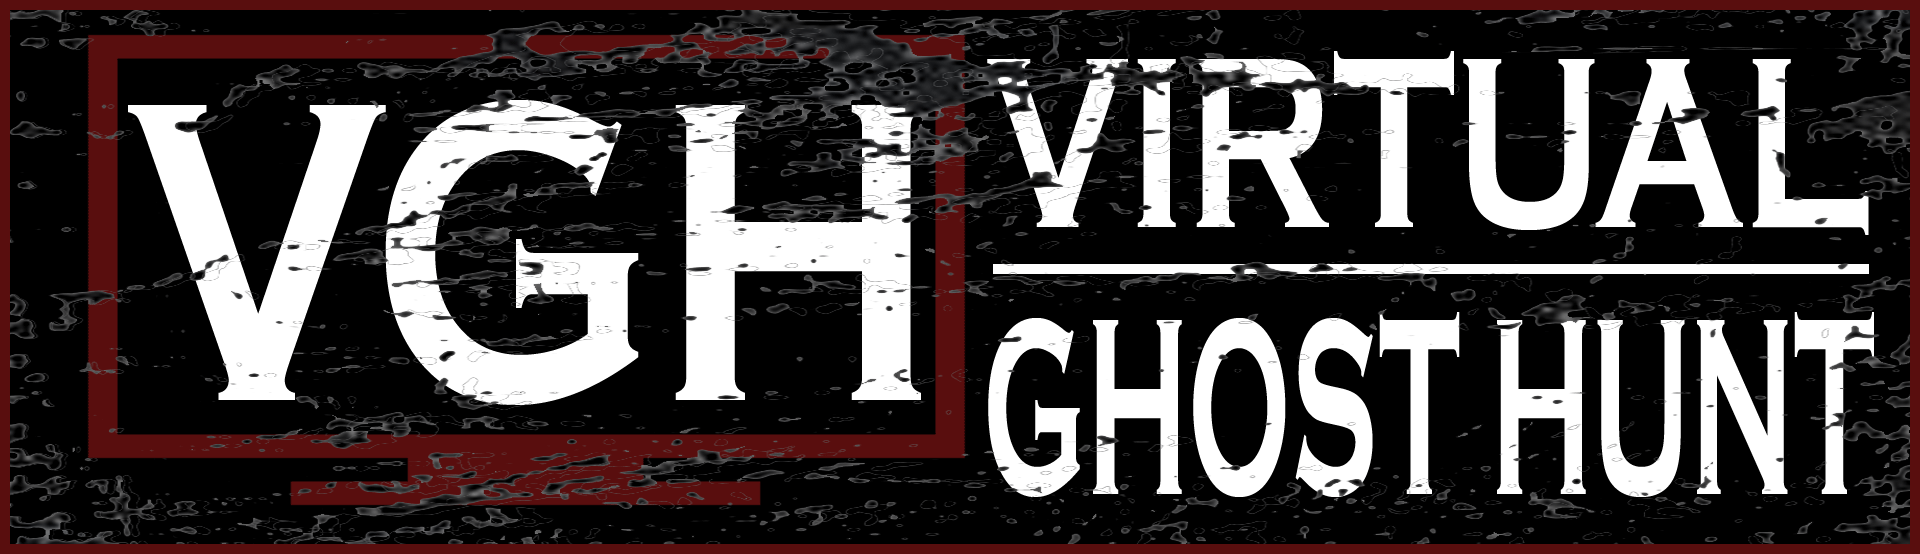 VirtualGhostHunt.com - Investigating the paranormal from the comfort of your home